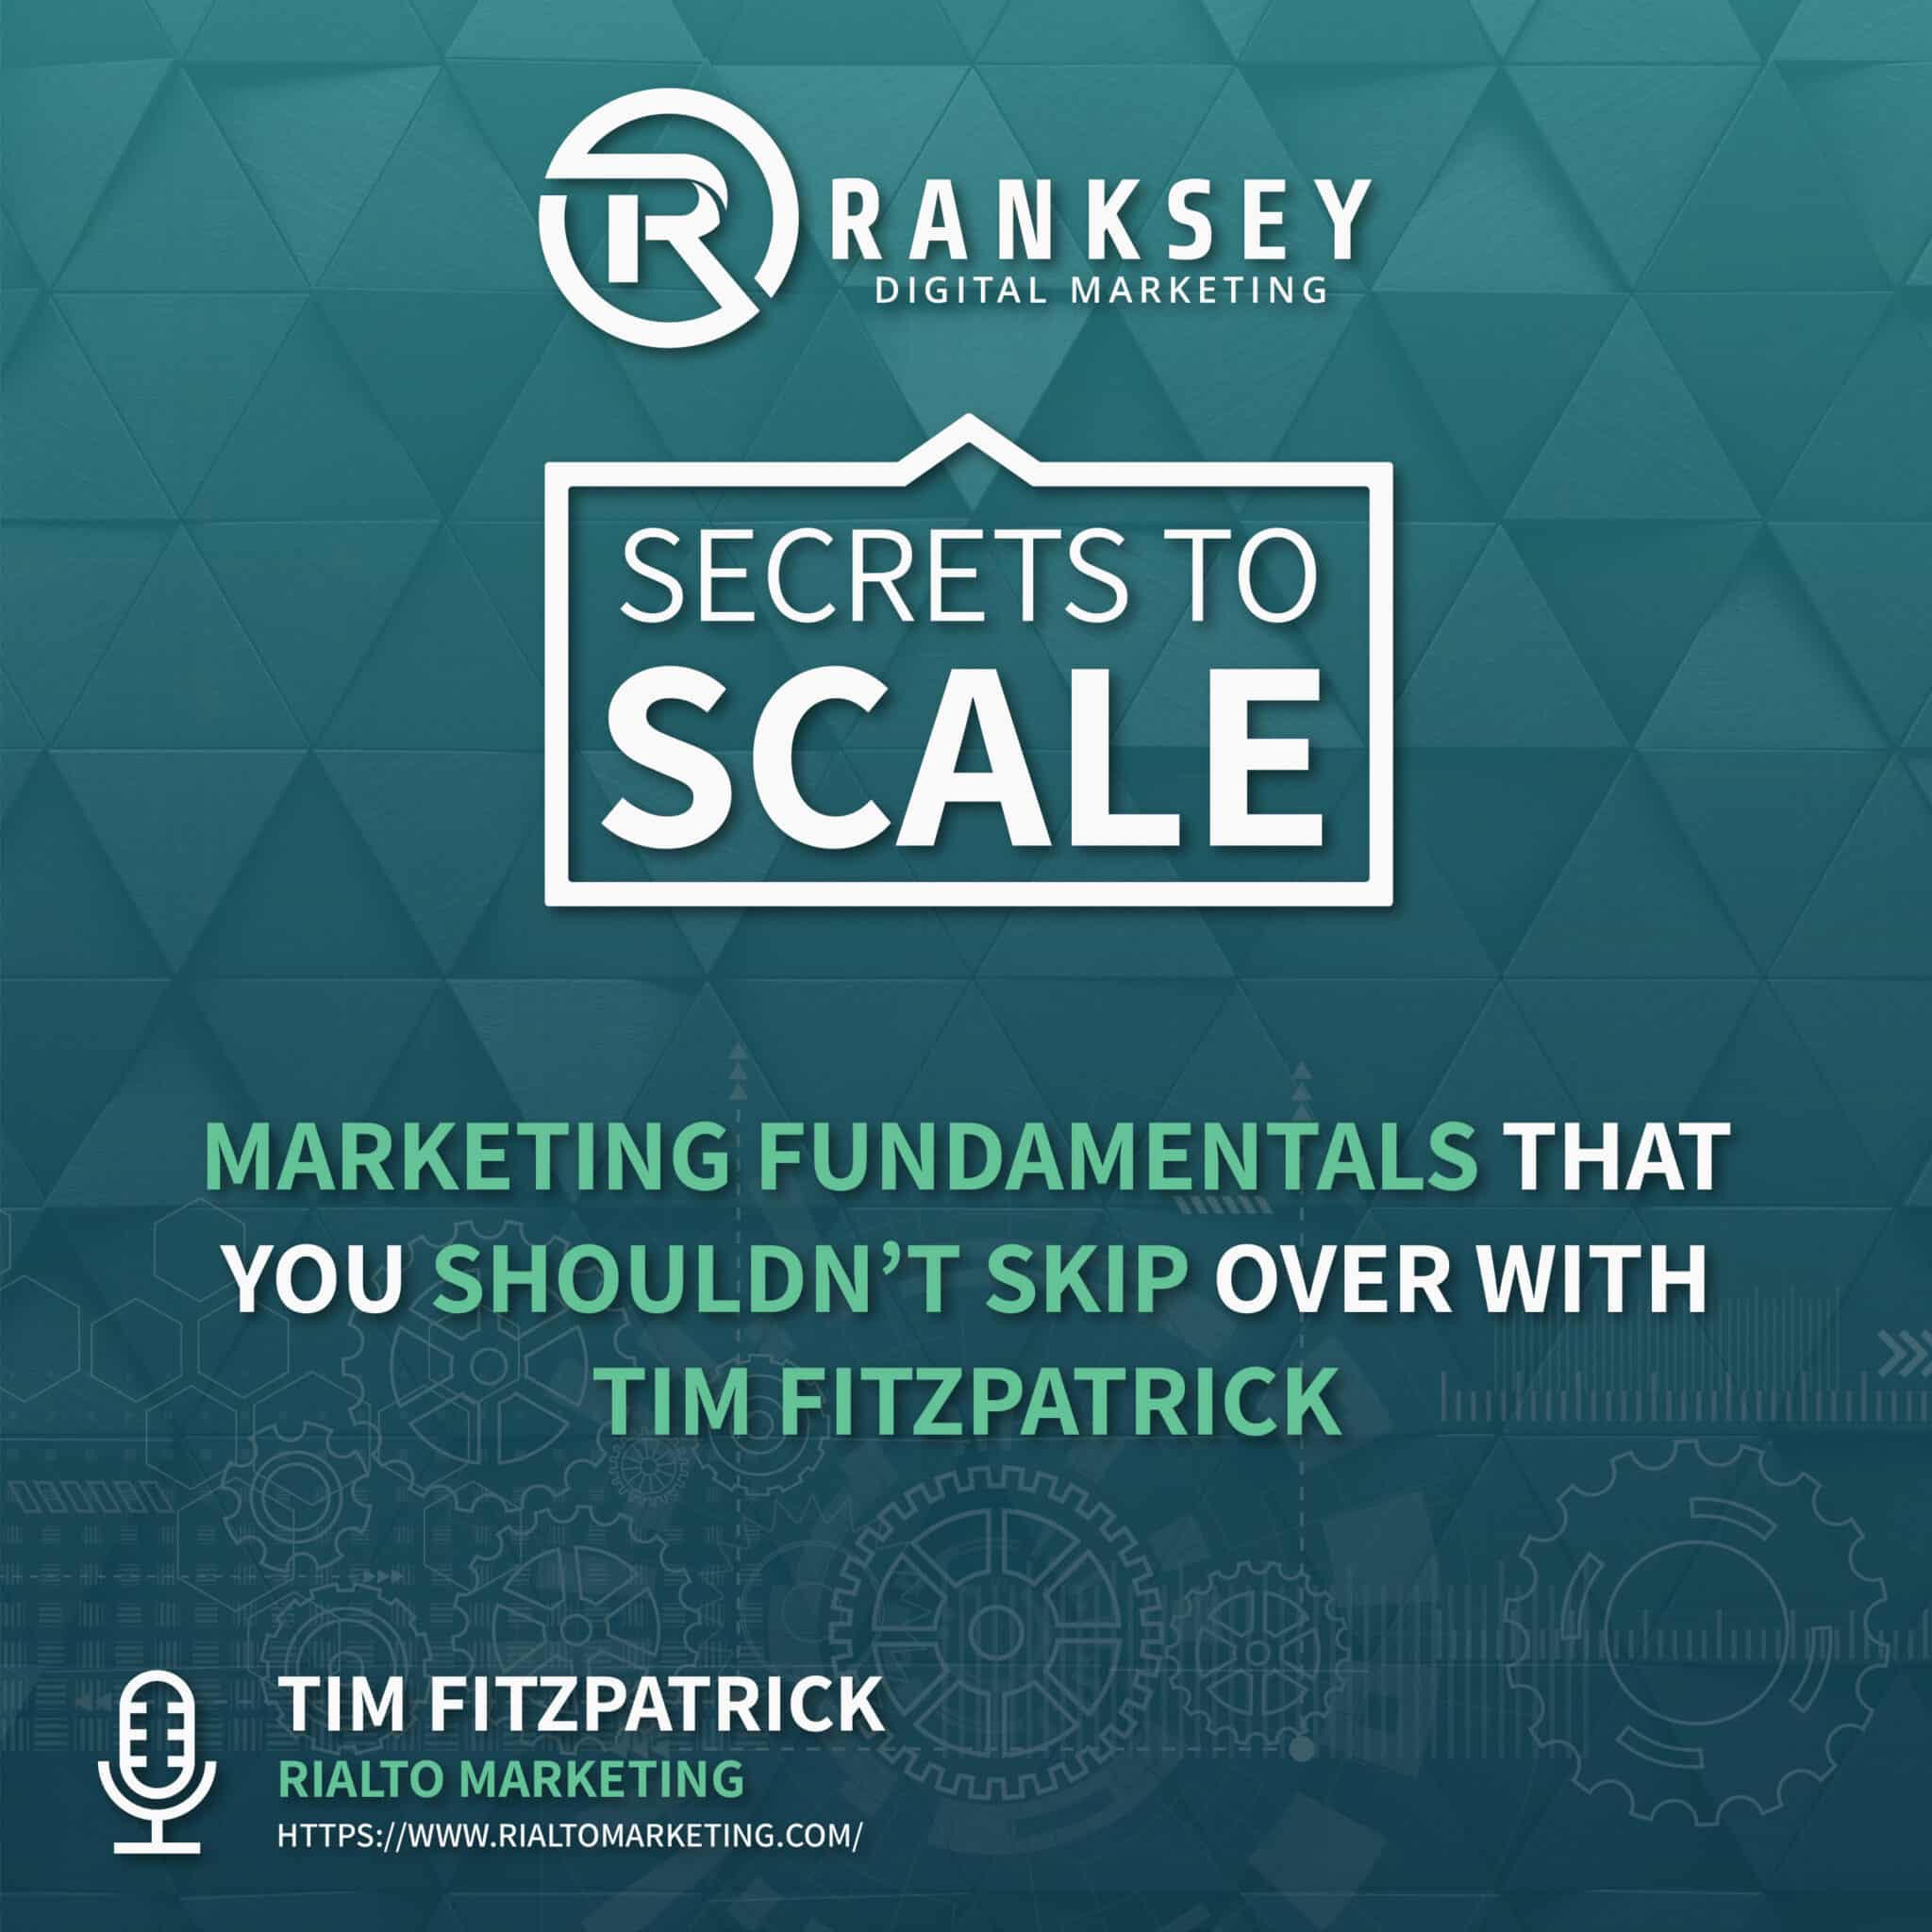 Marketing Fundamentals That You Shouldn't Skip Over with Tim Fitzpatrick